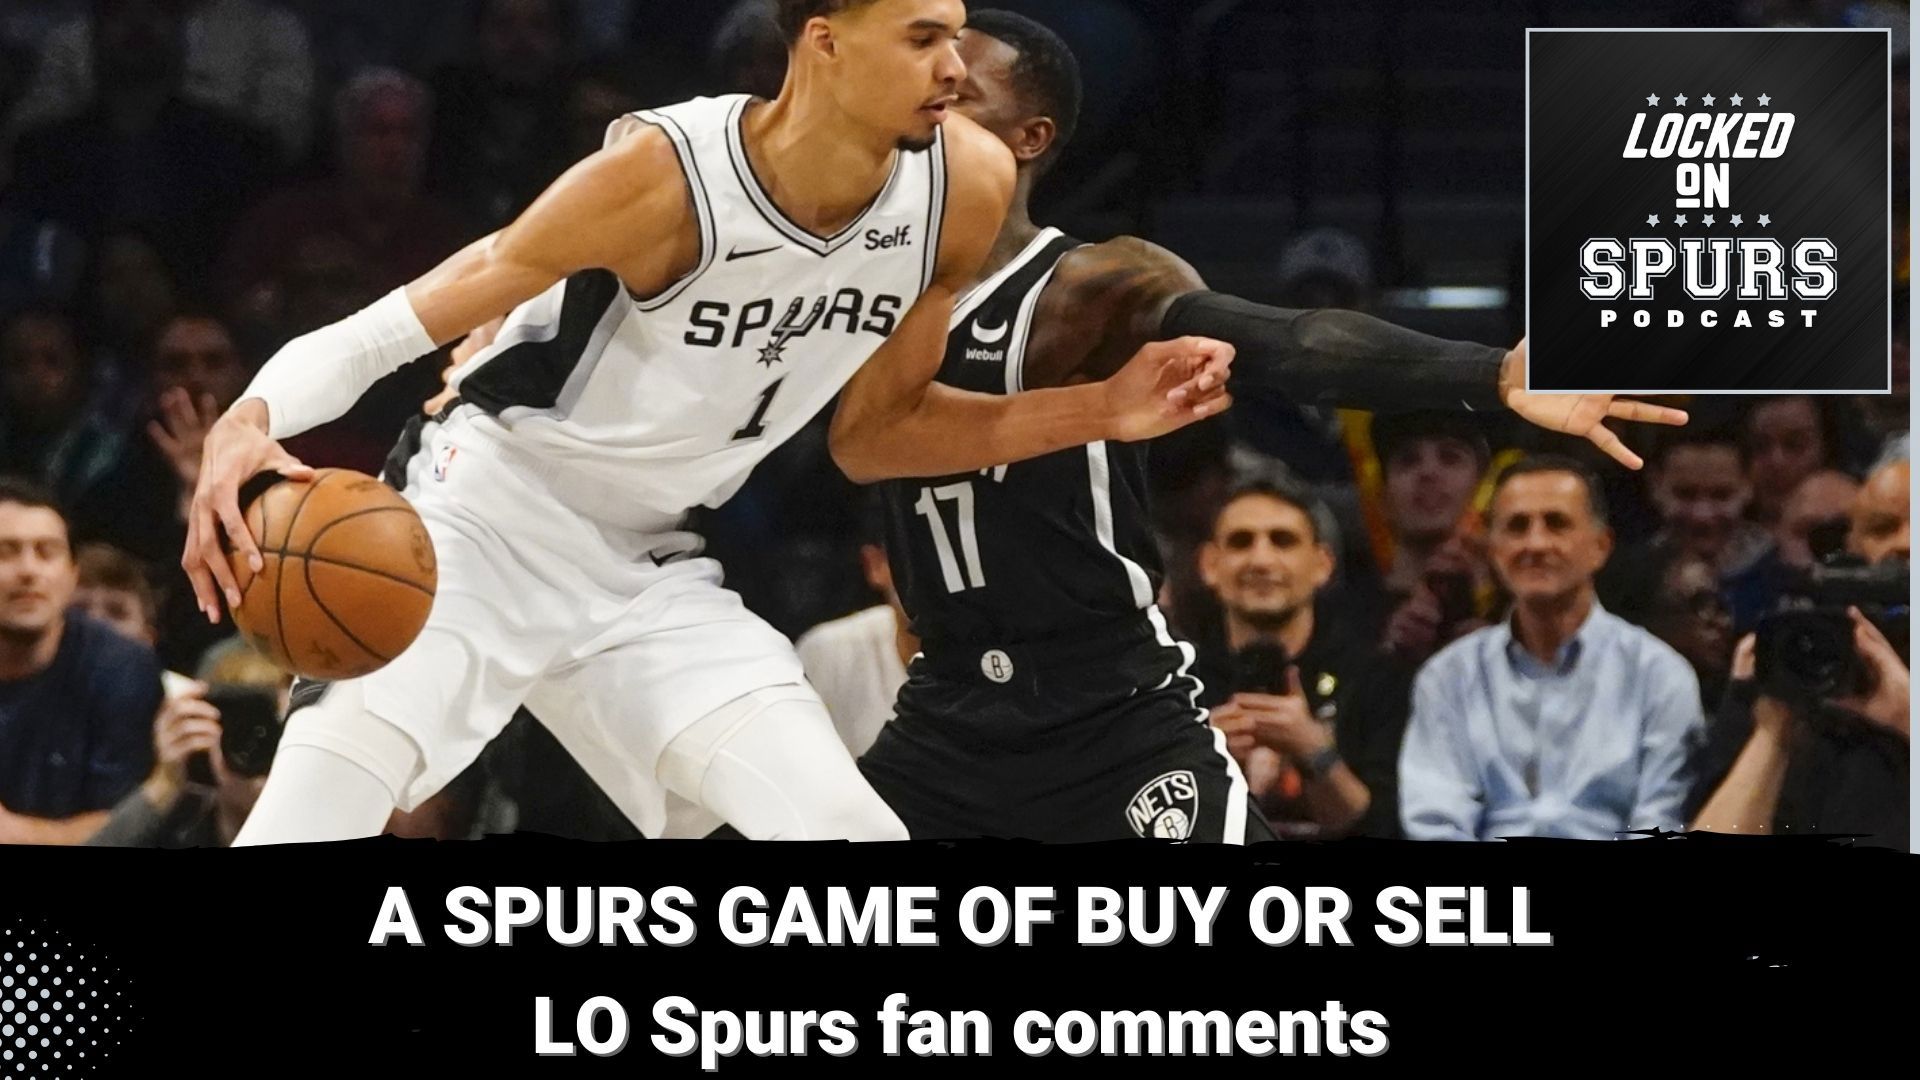 Also, we check in on what Locked On Spurs fans are talking about.